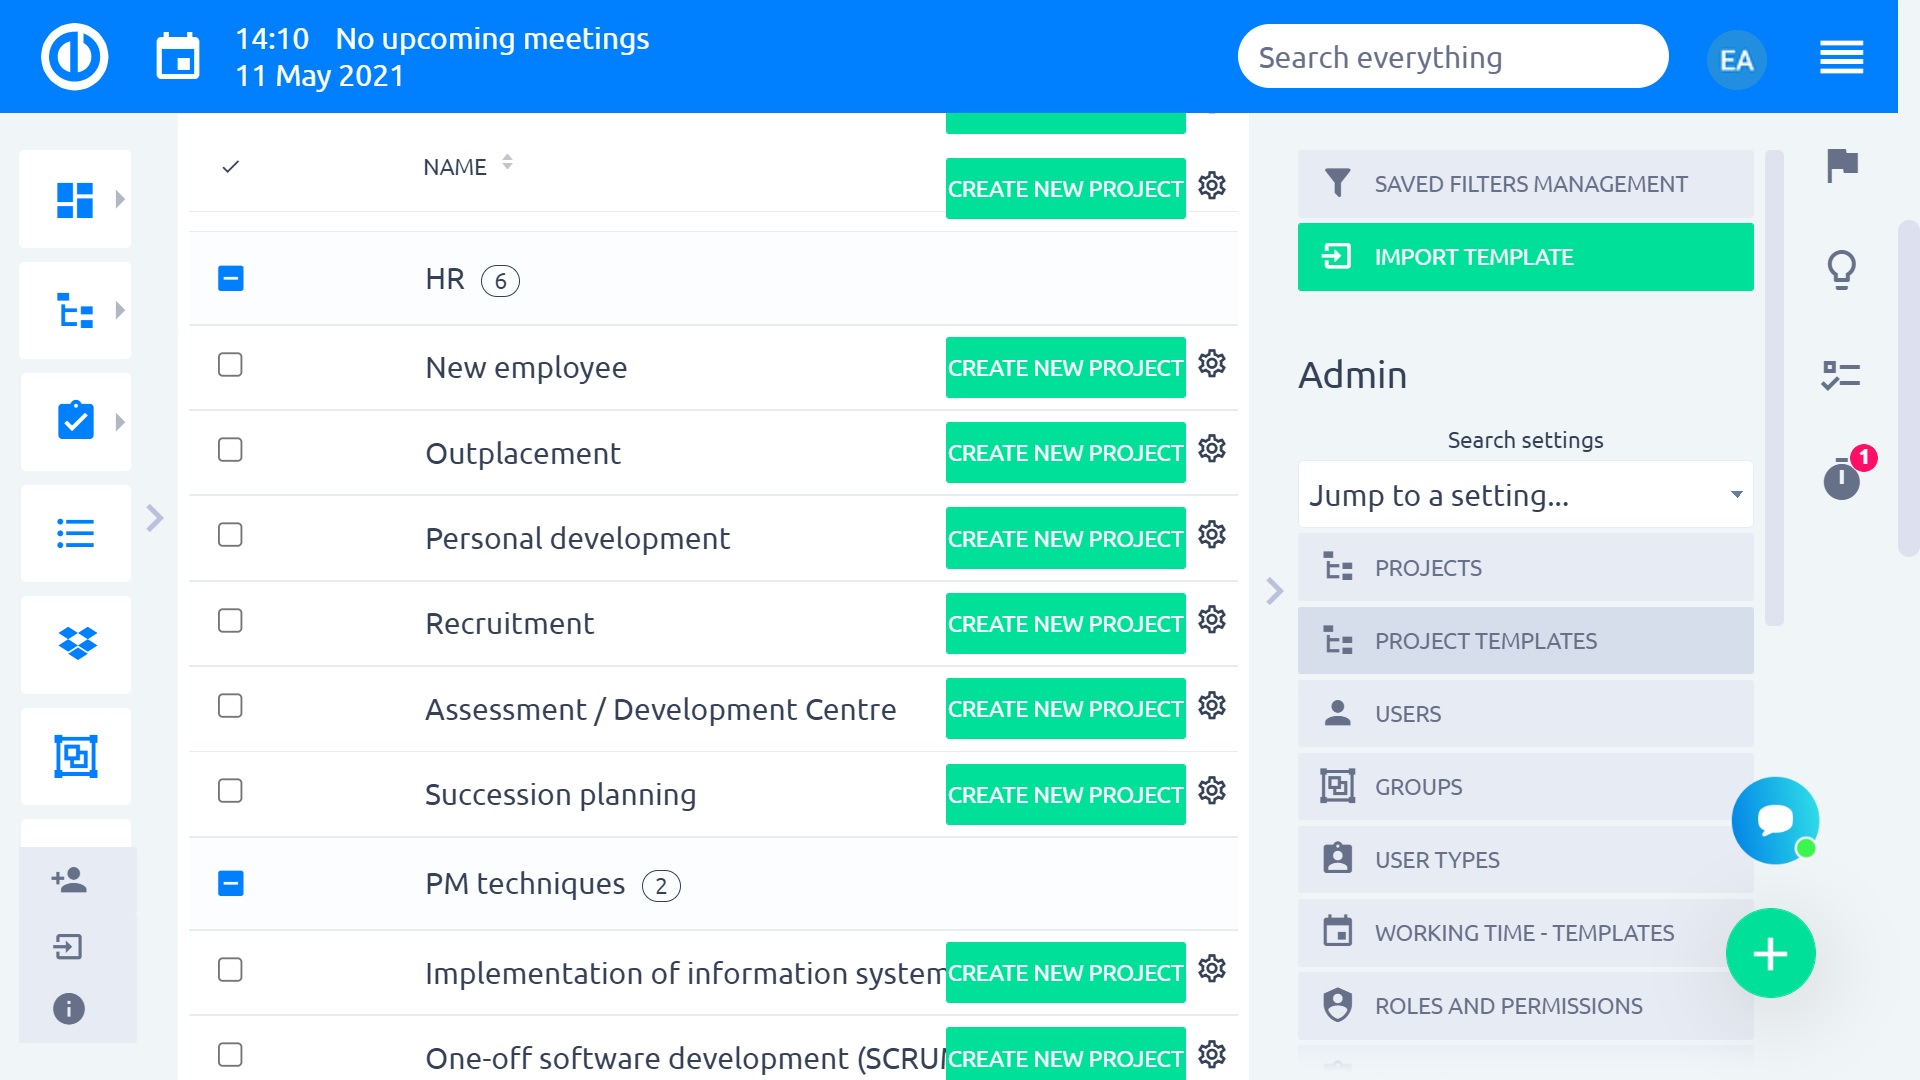 Easy Project – HR Project Templates